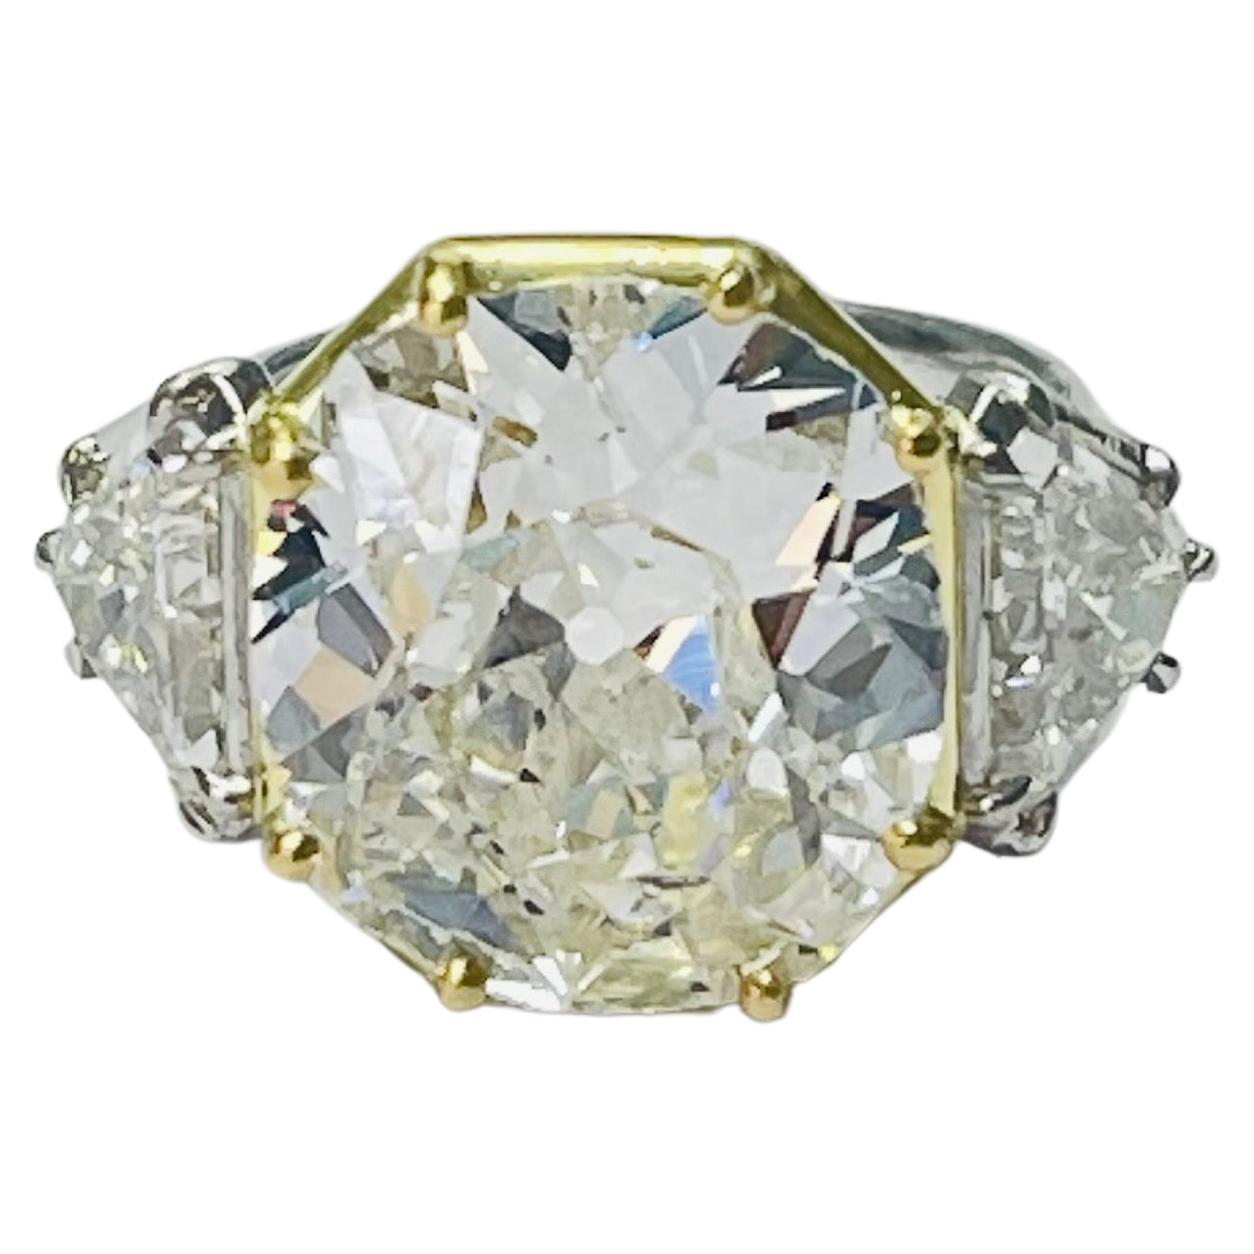 9.38 Carat Old Mine Cut Diamond Three Stone Ring in Yellow and White Gold